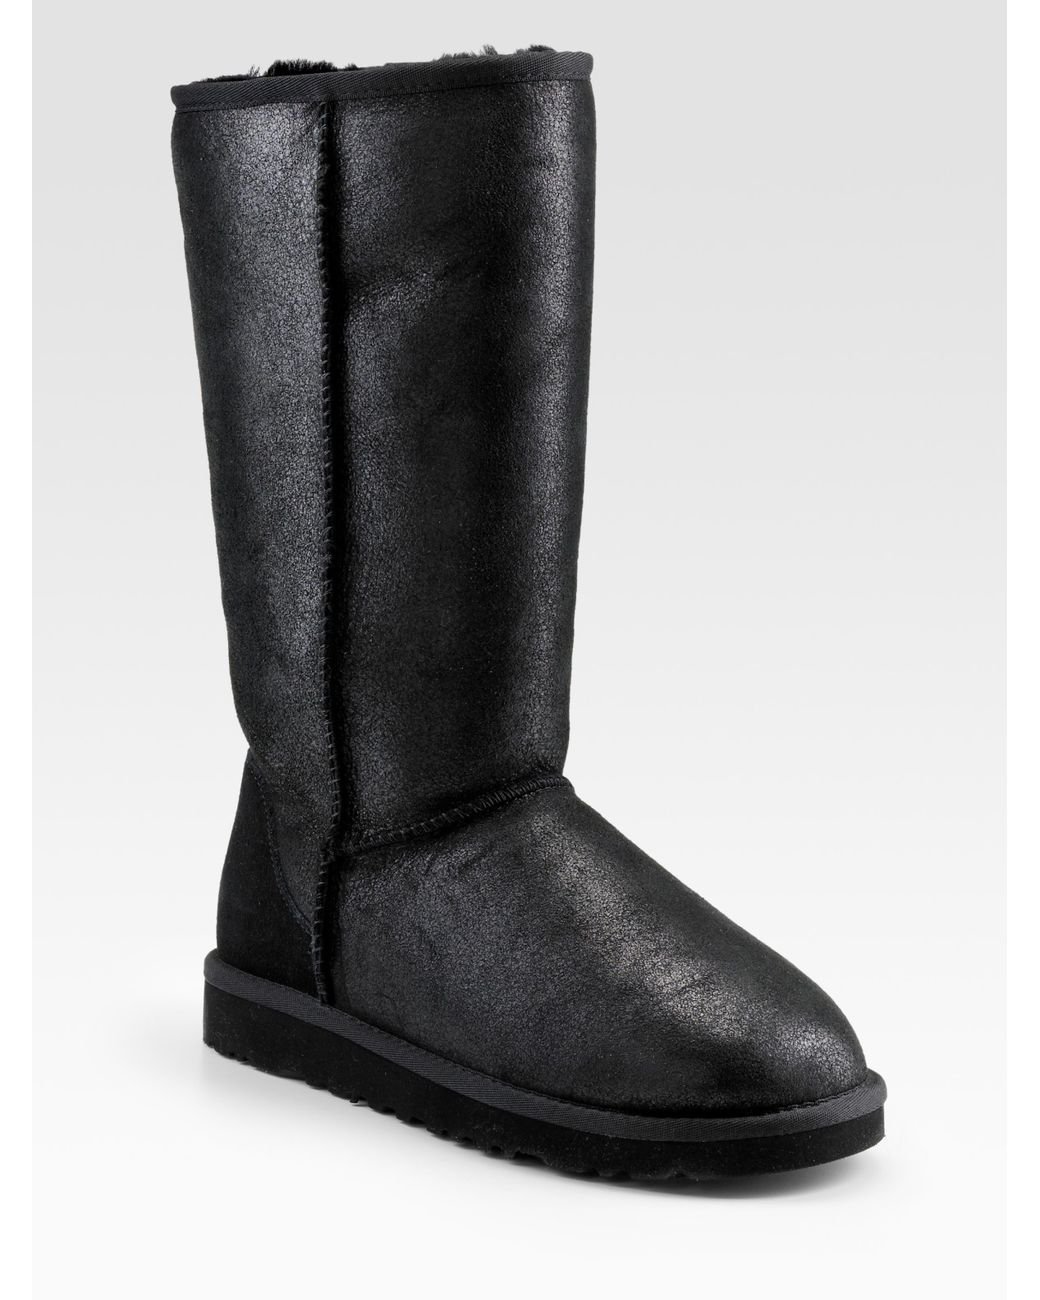 UGG Classic Leather Tall Bomber Boots in Black